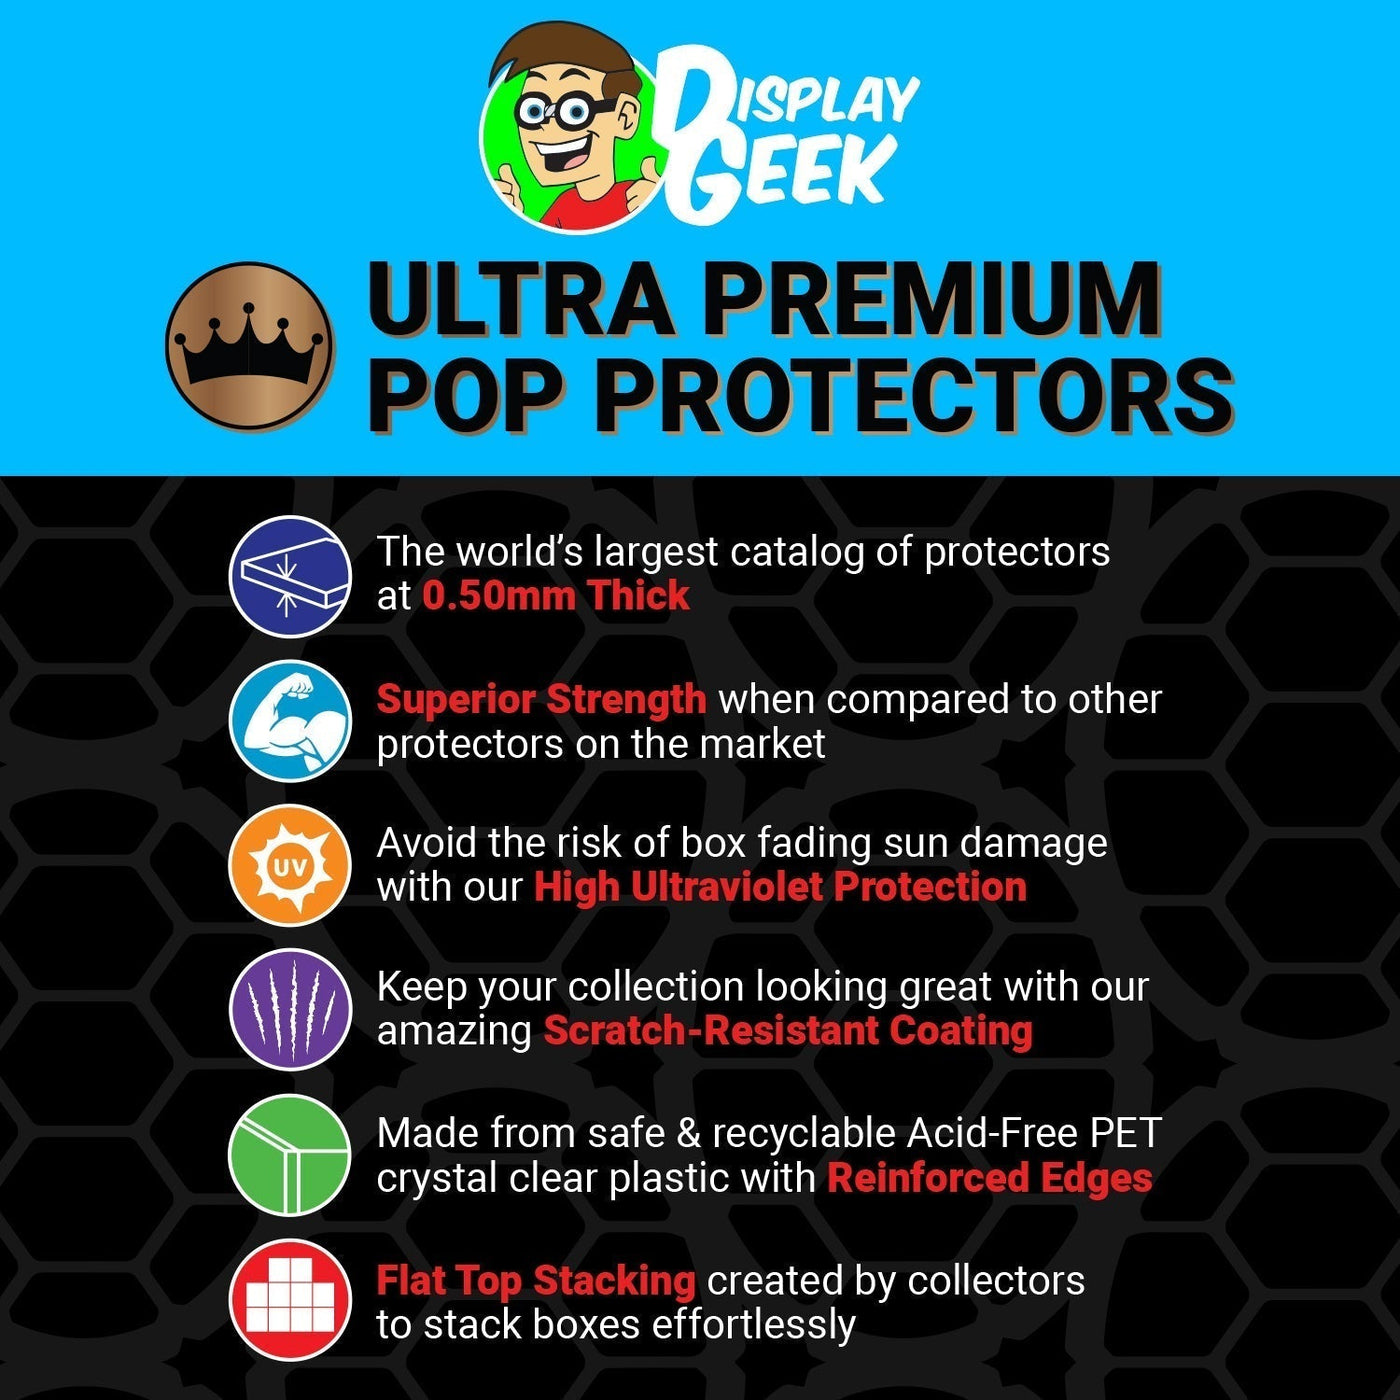 Pop Protector for Victory Shawarma Captain America #758 Funko Pop Deluxe on The Protector Guide App by Display Geek